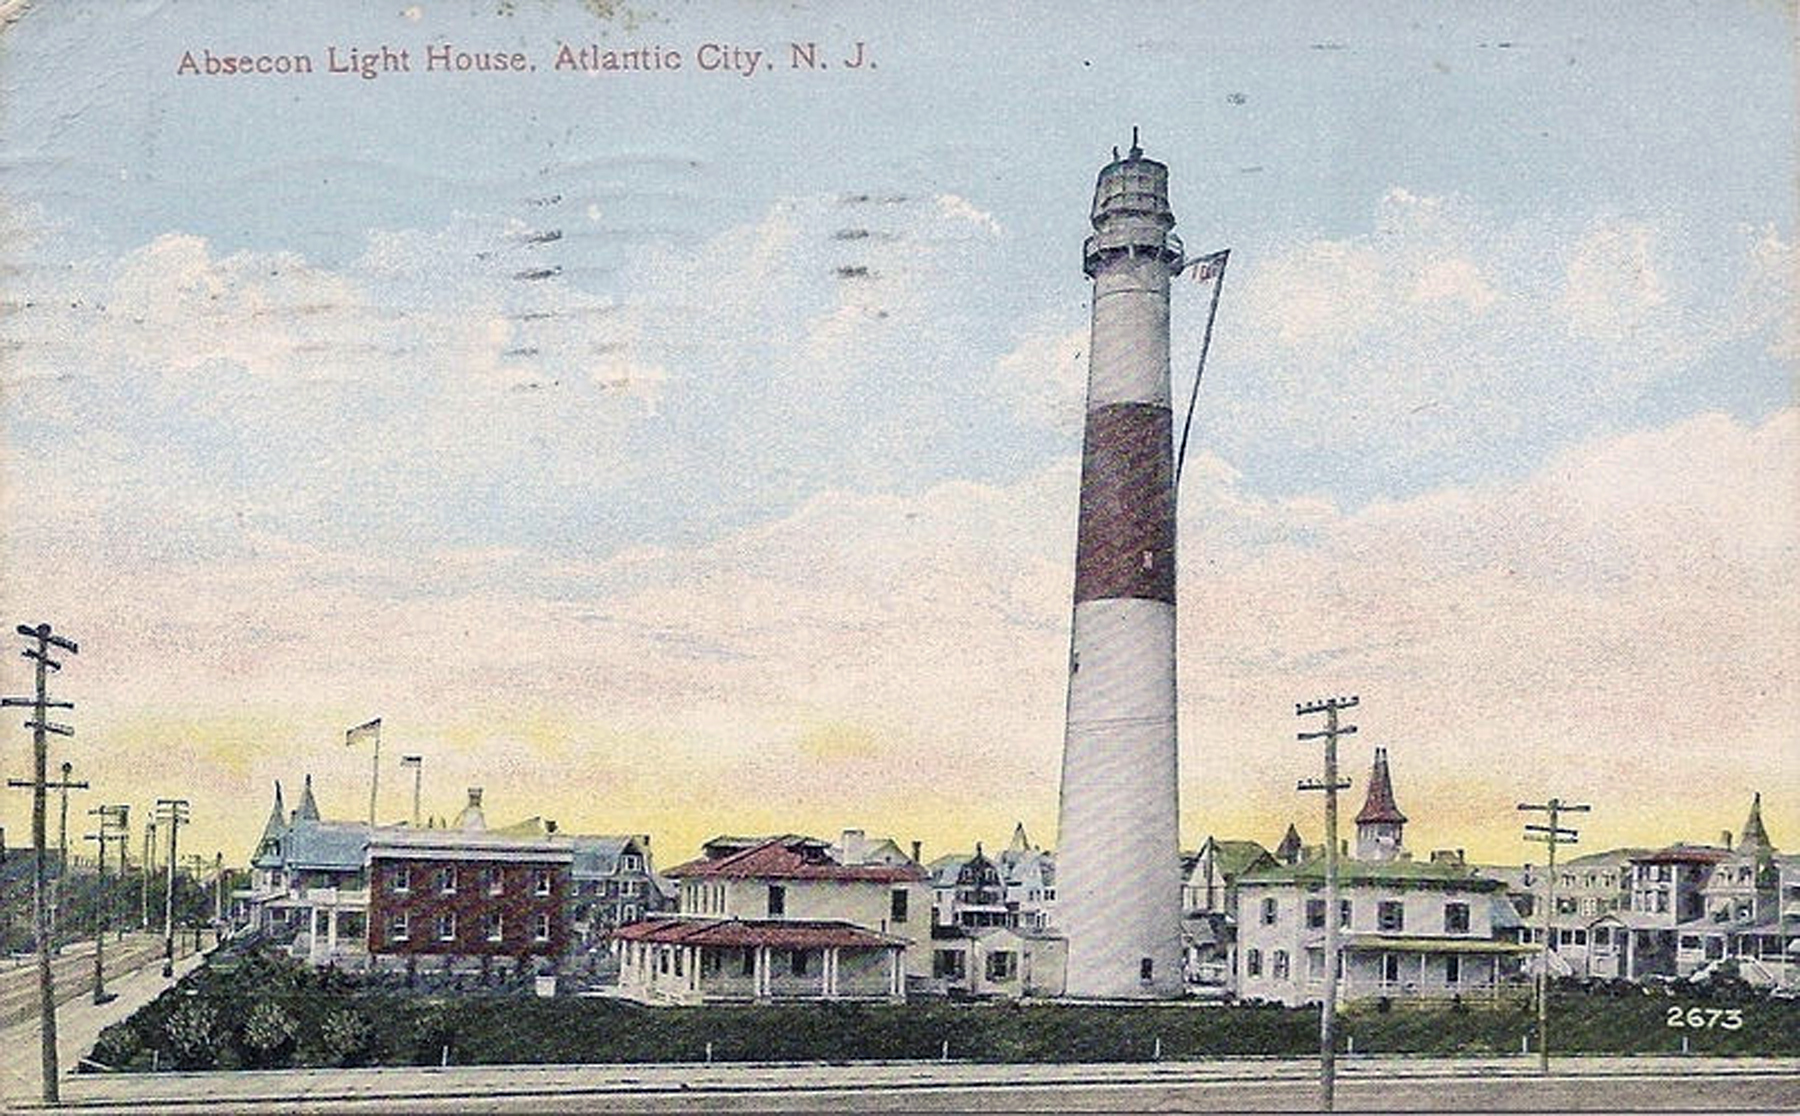 Atlantic City - Absecom Light and suroundings - c 1910